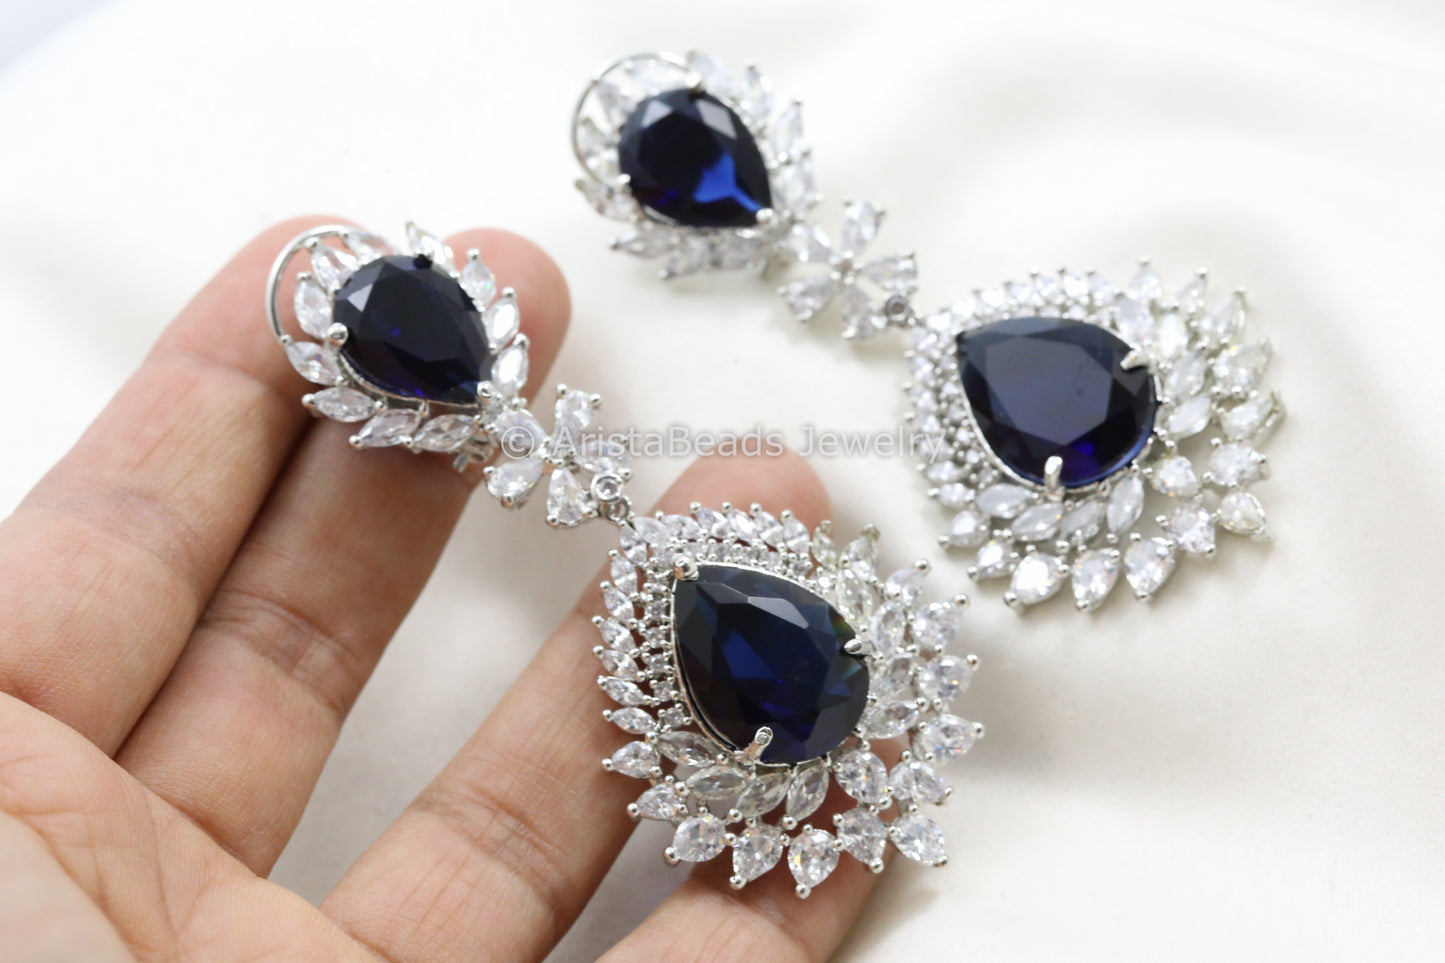 Large Sapphire CZ Earring in Silver Finish